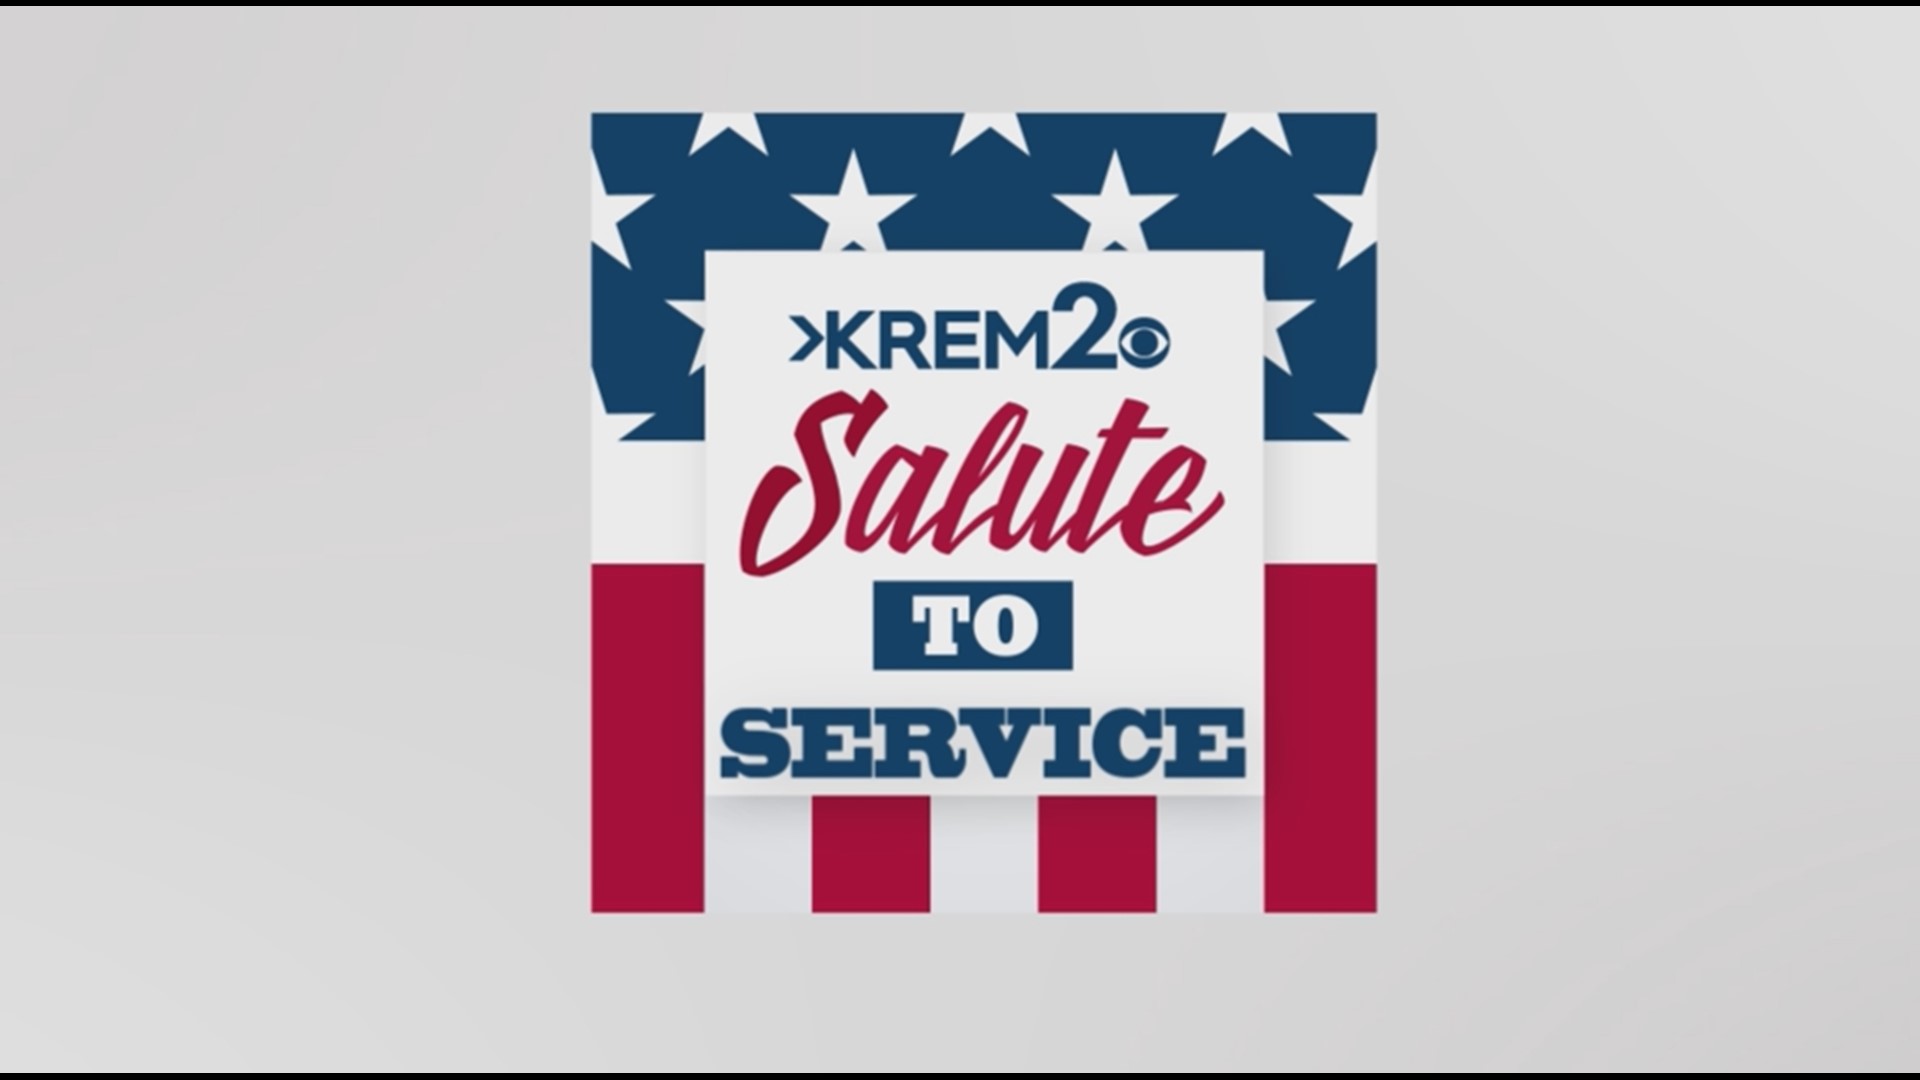 KREM Cares honors those who have served our country with an emotional look at how the Inland Northwest is giving back to our veterans.